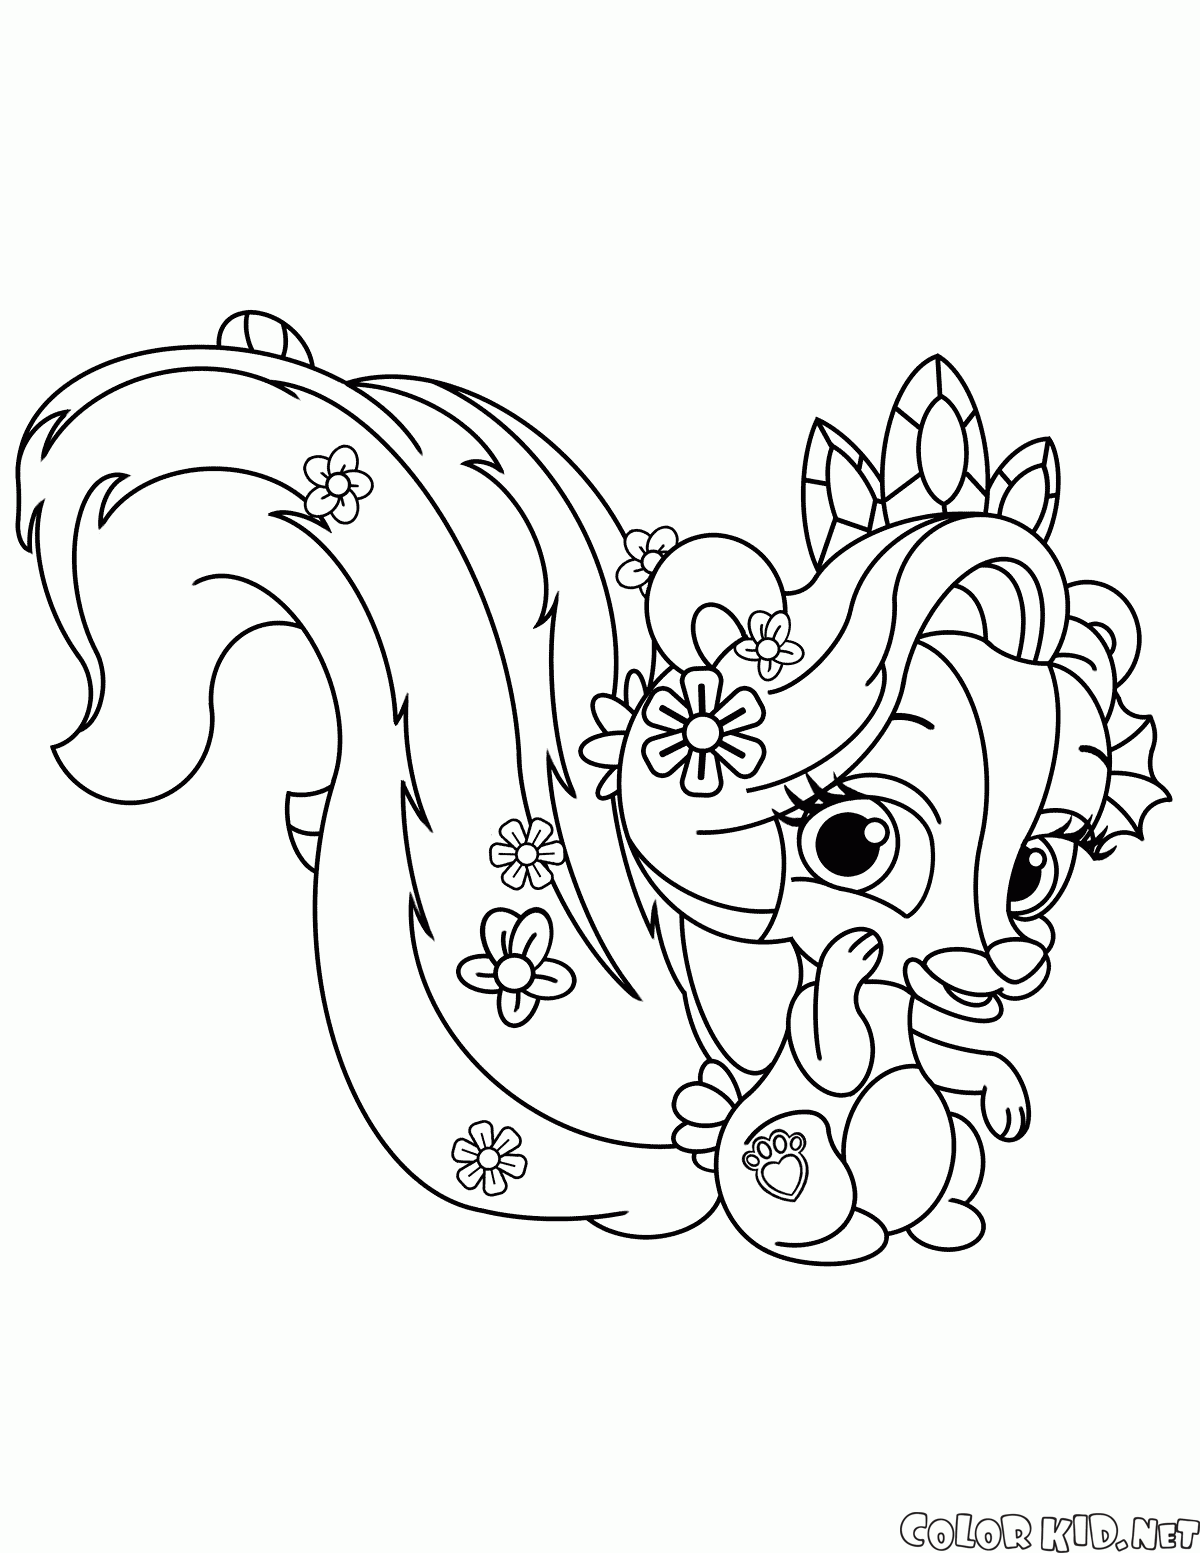 Realistic Skunk Coloring Pages - Coloring Home